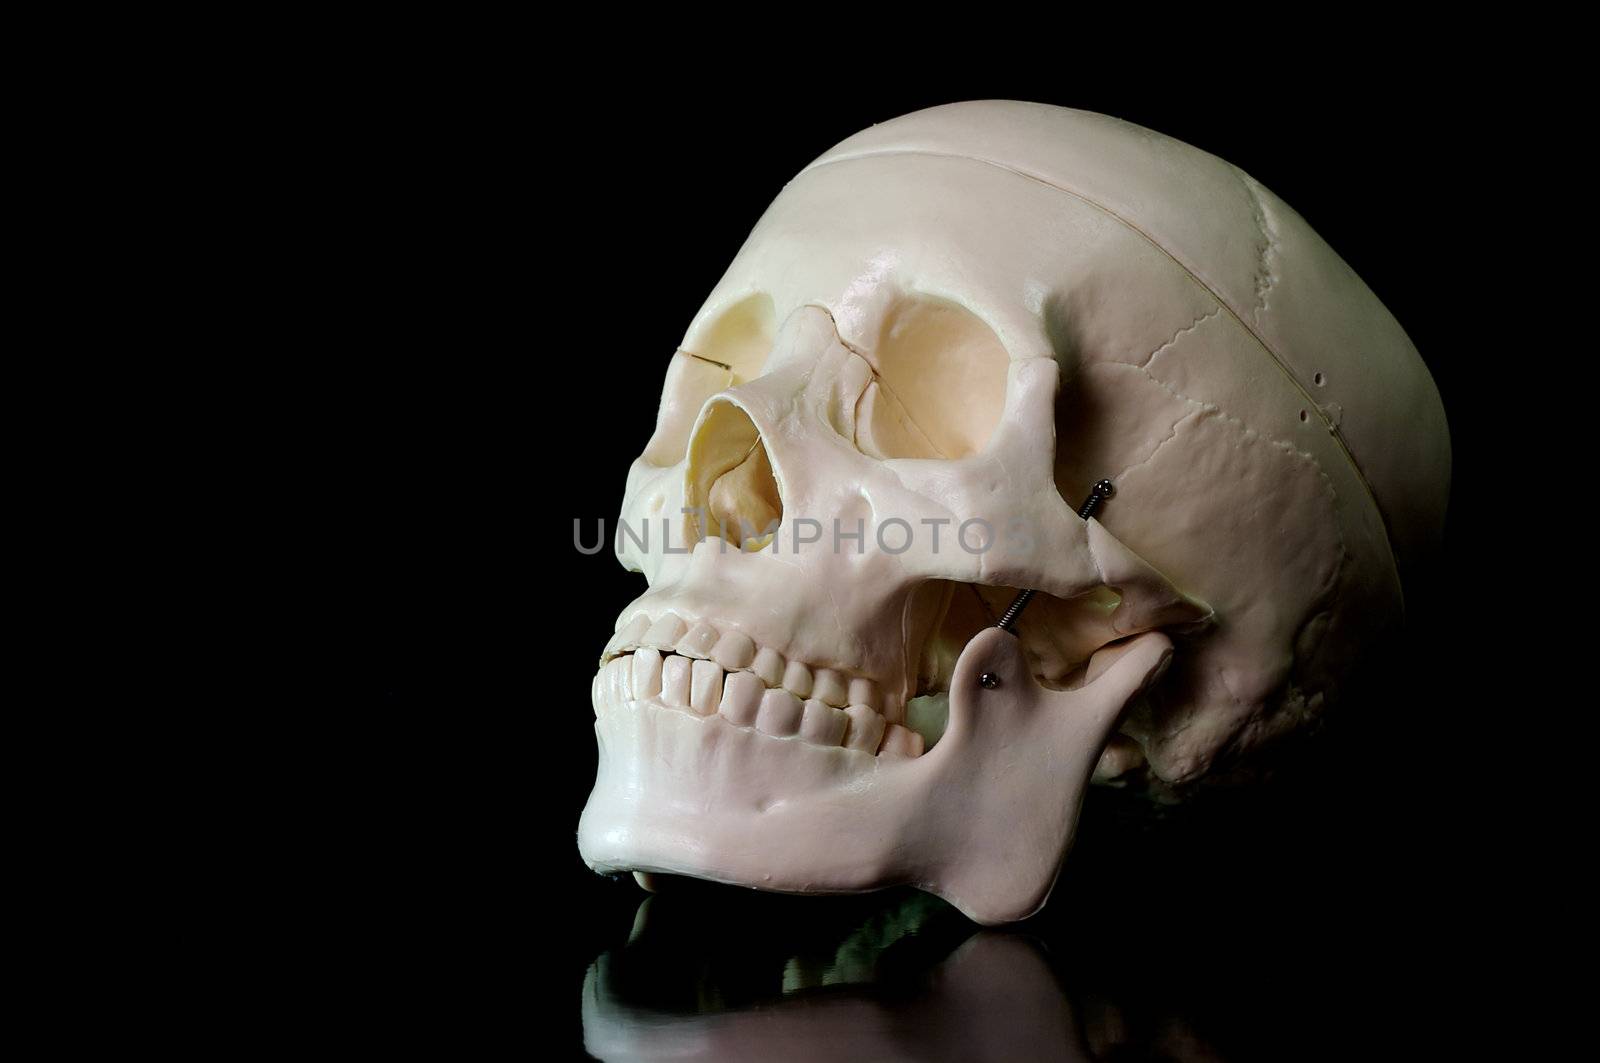 Skull on black background by Talanis